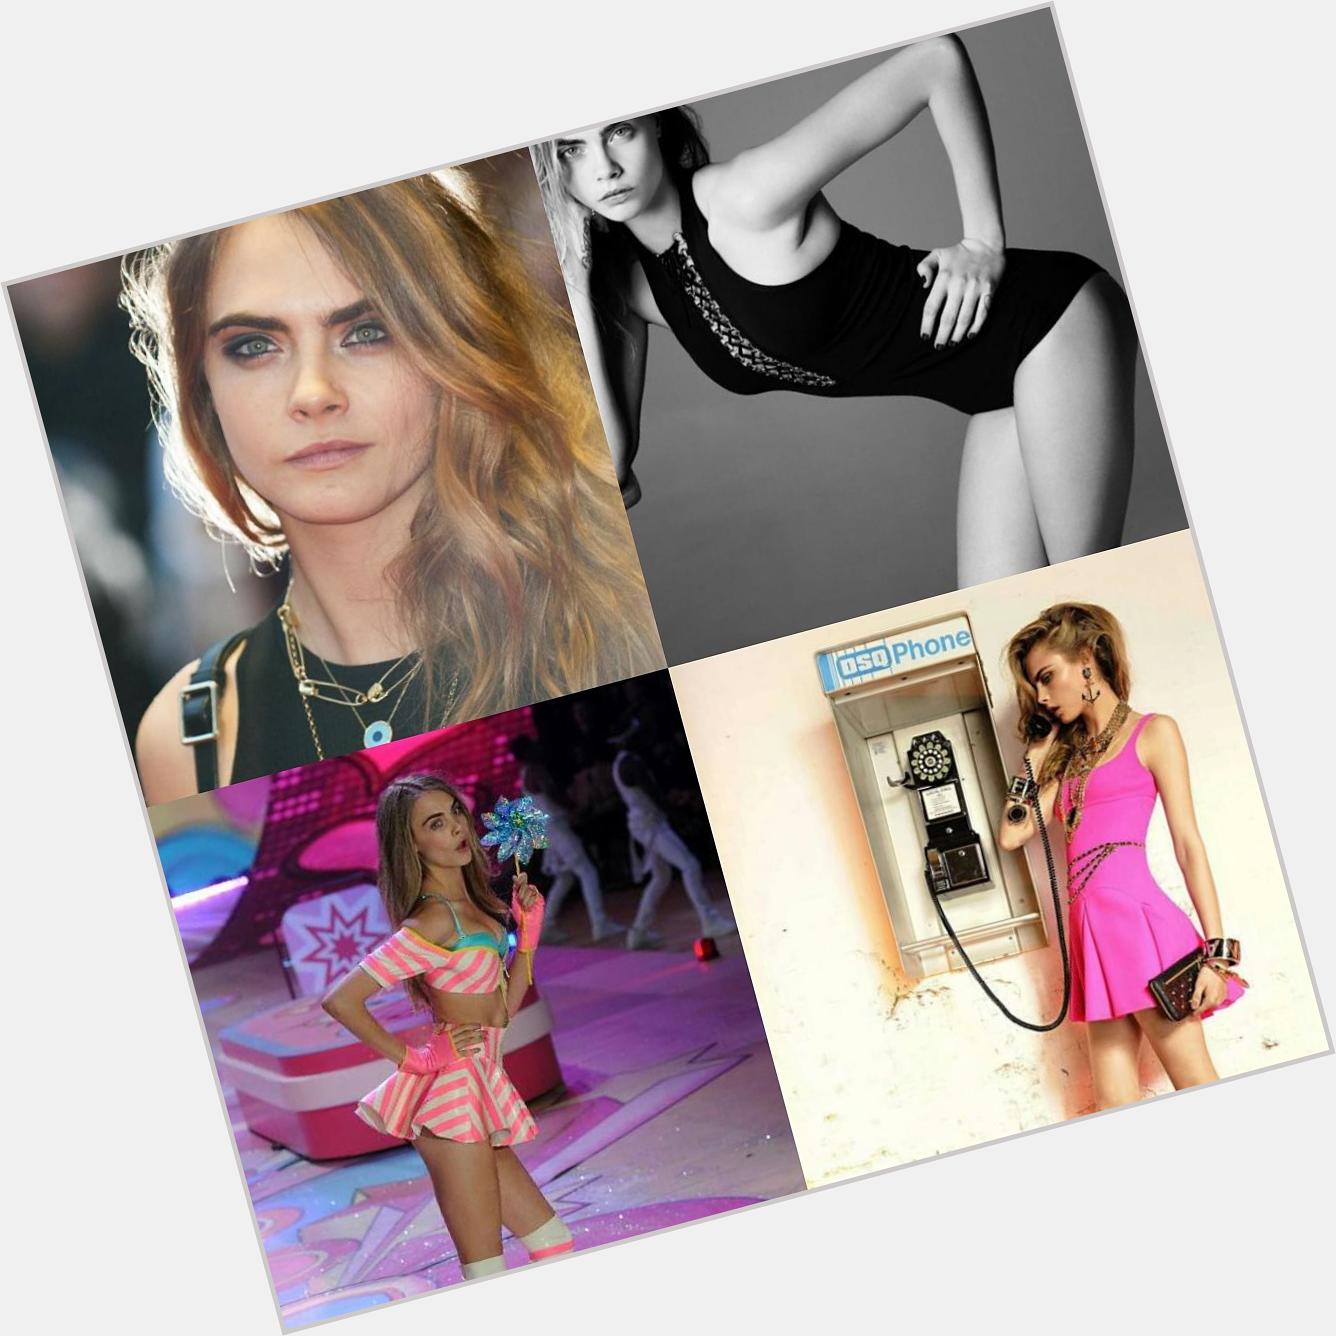 Happy 24th birthday to the beautiful Cara Delevingne 